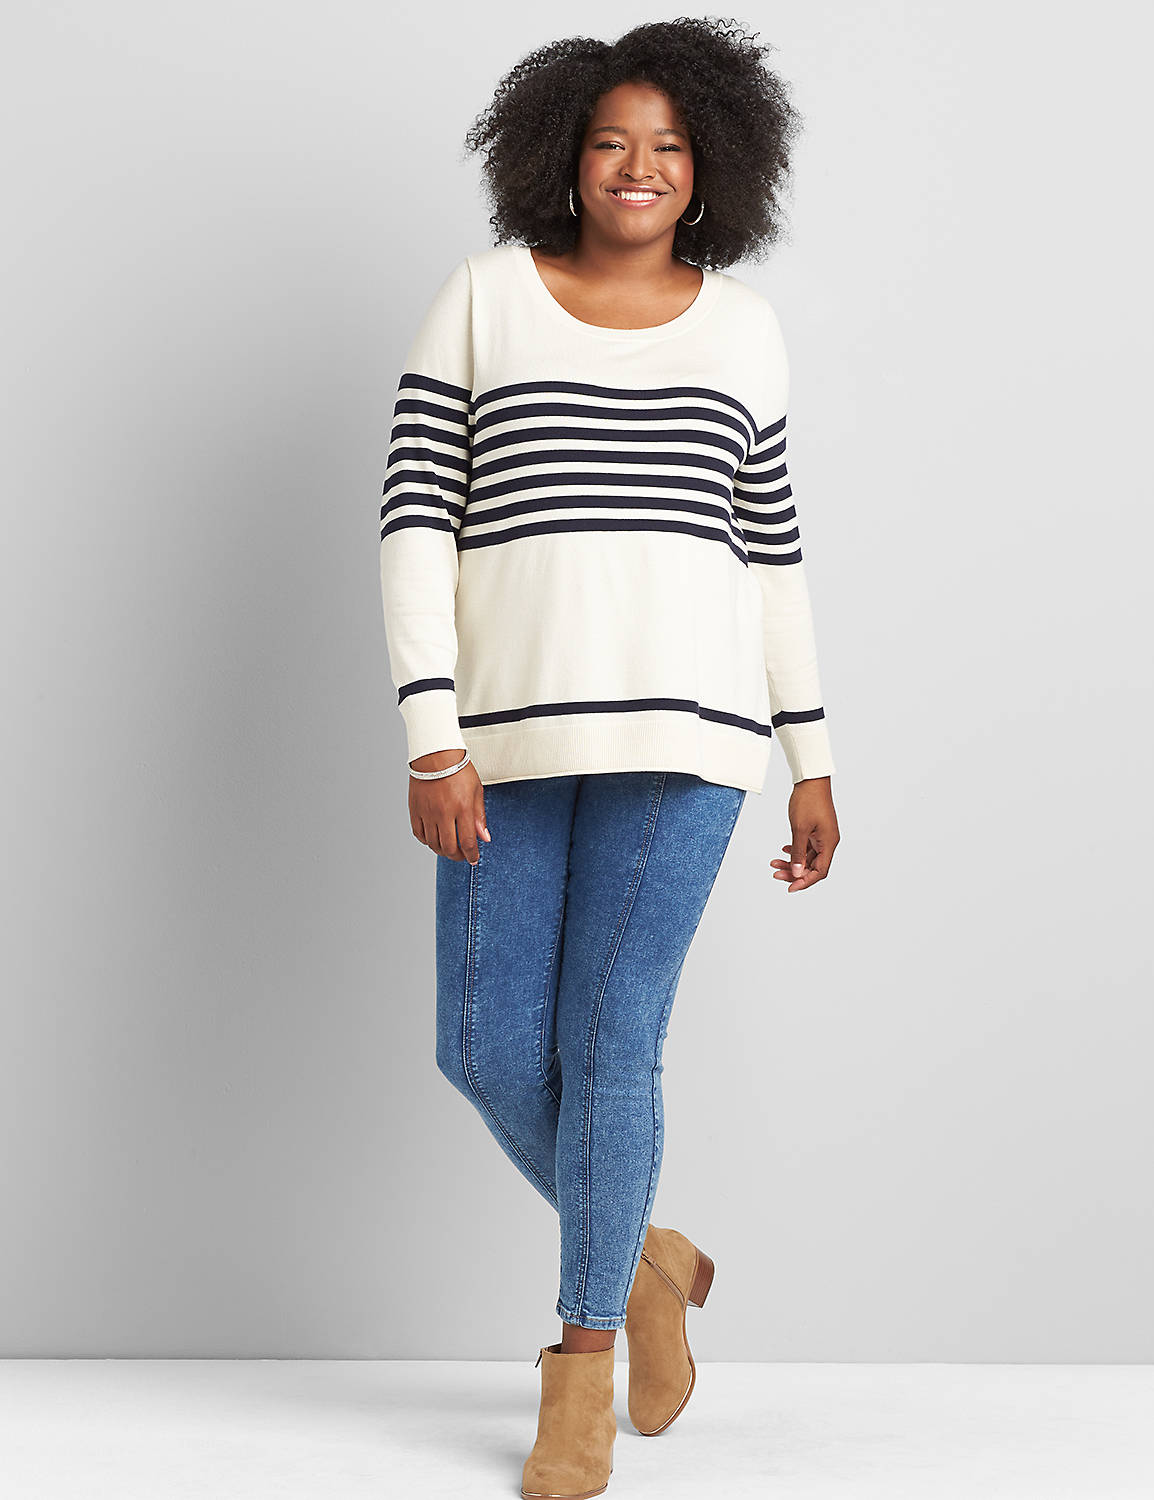 Long Sleeve Open Crew Neck Sweater with Stripes 1117590:PANTONE Pristine:10/12 Product Image 3